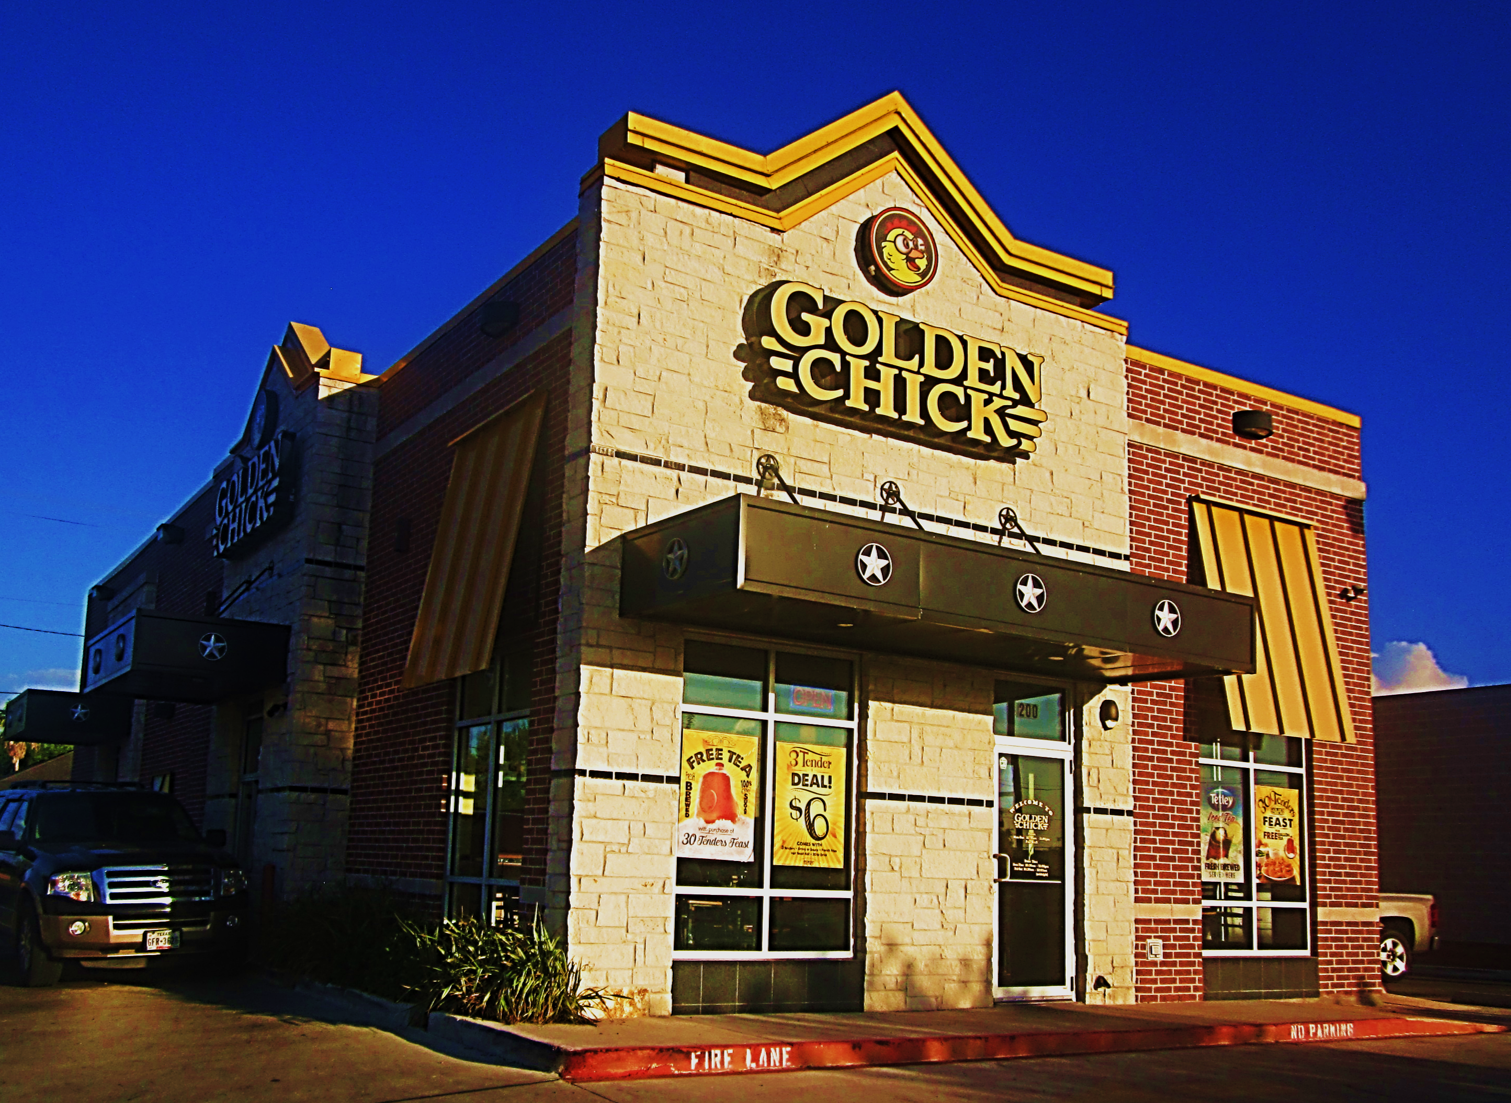 Golden Chick storefront.  Your local Golden Chick fast food restaurant in Alton, Texas